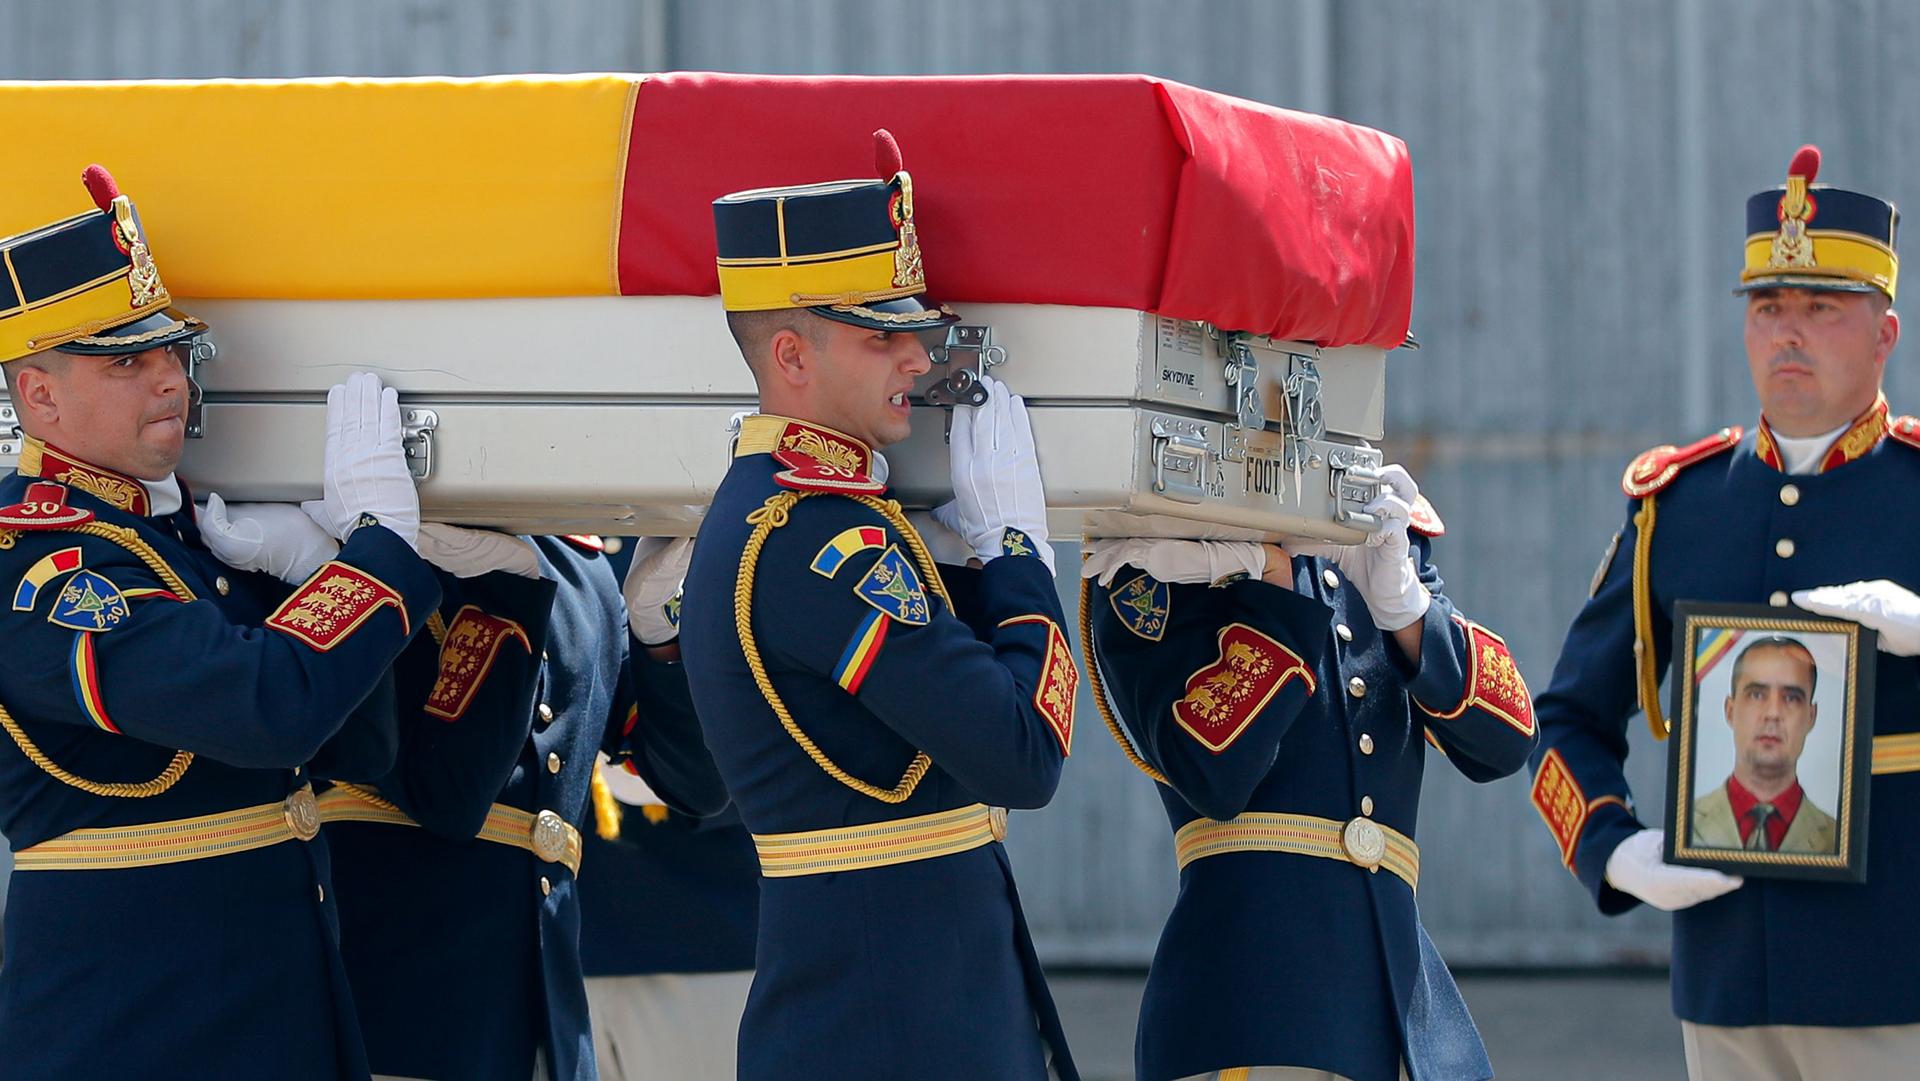 Honor guard soldiers carry the coffin of Vasile Raduna, seen in the photo on the right, during the ceremony for the repatriation his and of Corp. Ciprian-Stefan Polschi's body from Afghanistan, in Bucharest, Romania, Tuesday, Sept. 10, 2019. 